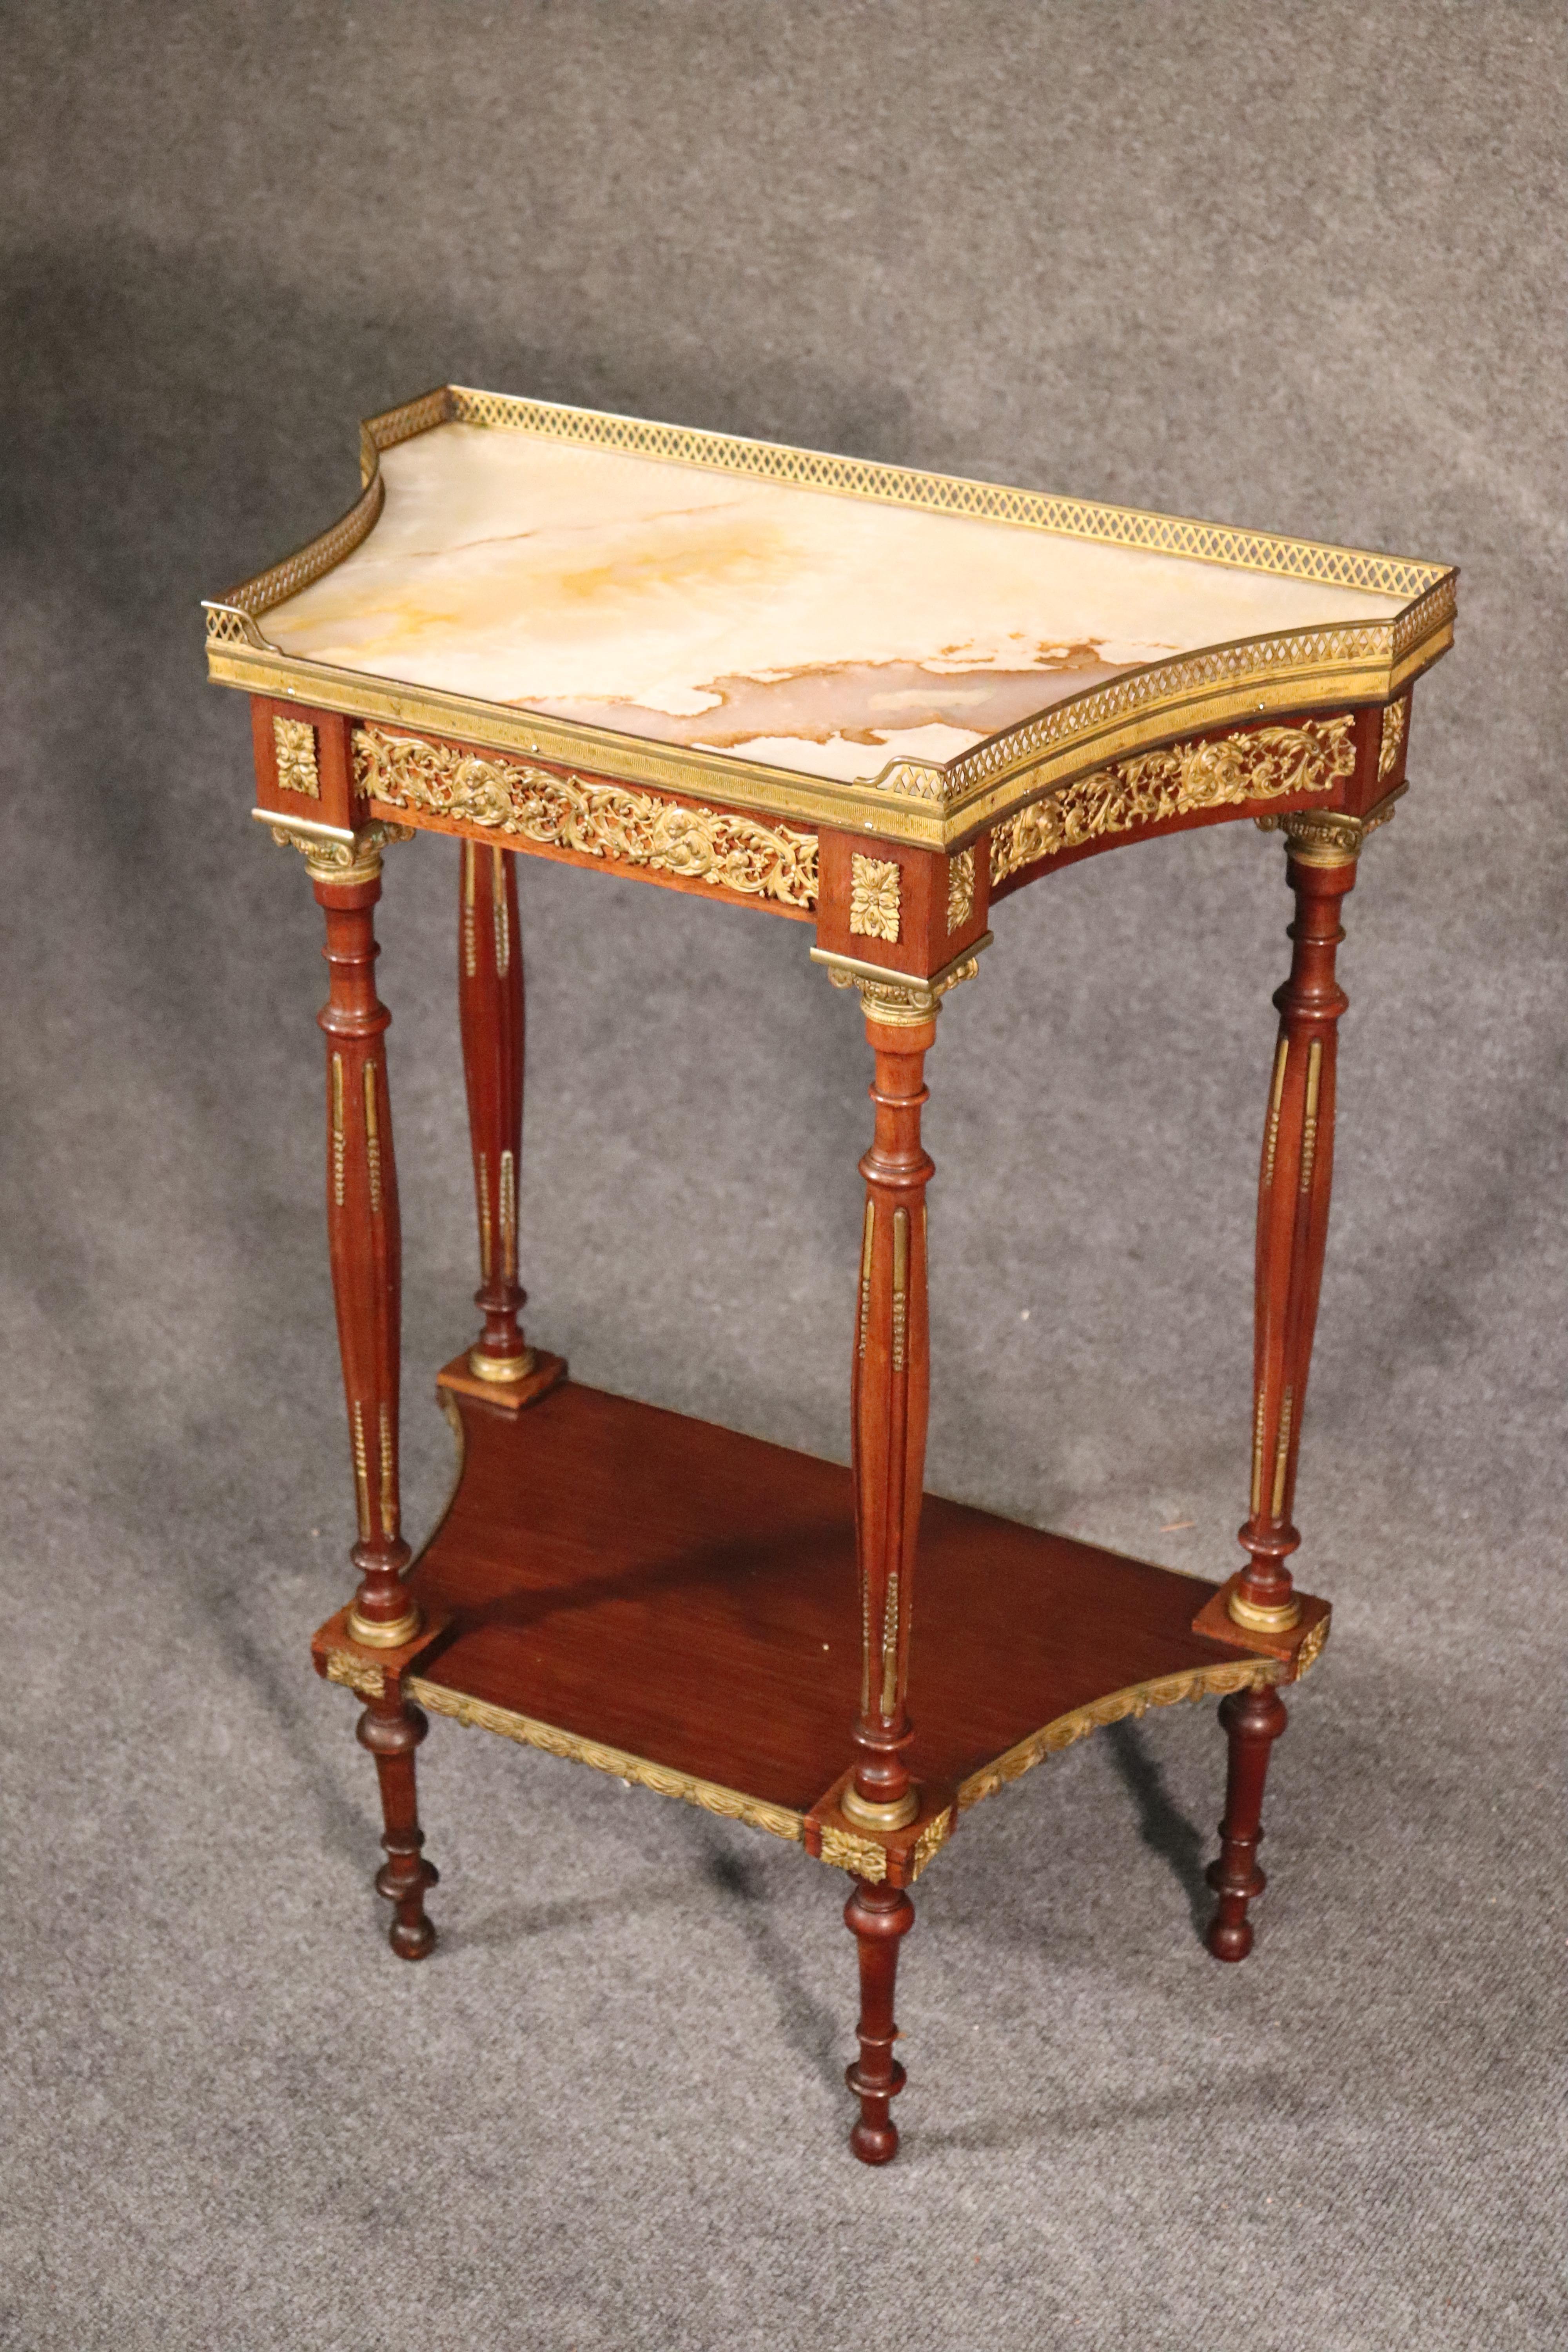 This is a fantastic and beautifully made French end table or plantstand. The table top is translucent onyx and has been professionally repaired so it appears almost perfect. The bronze ormolu is exceptionally well-defined and extremely beautiful.